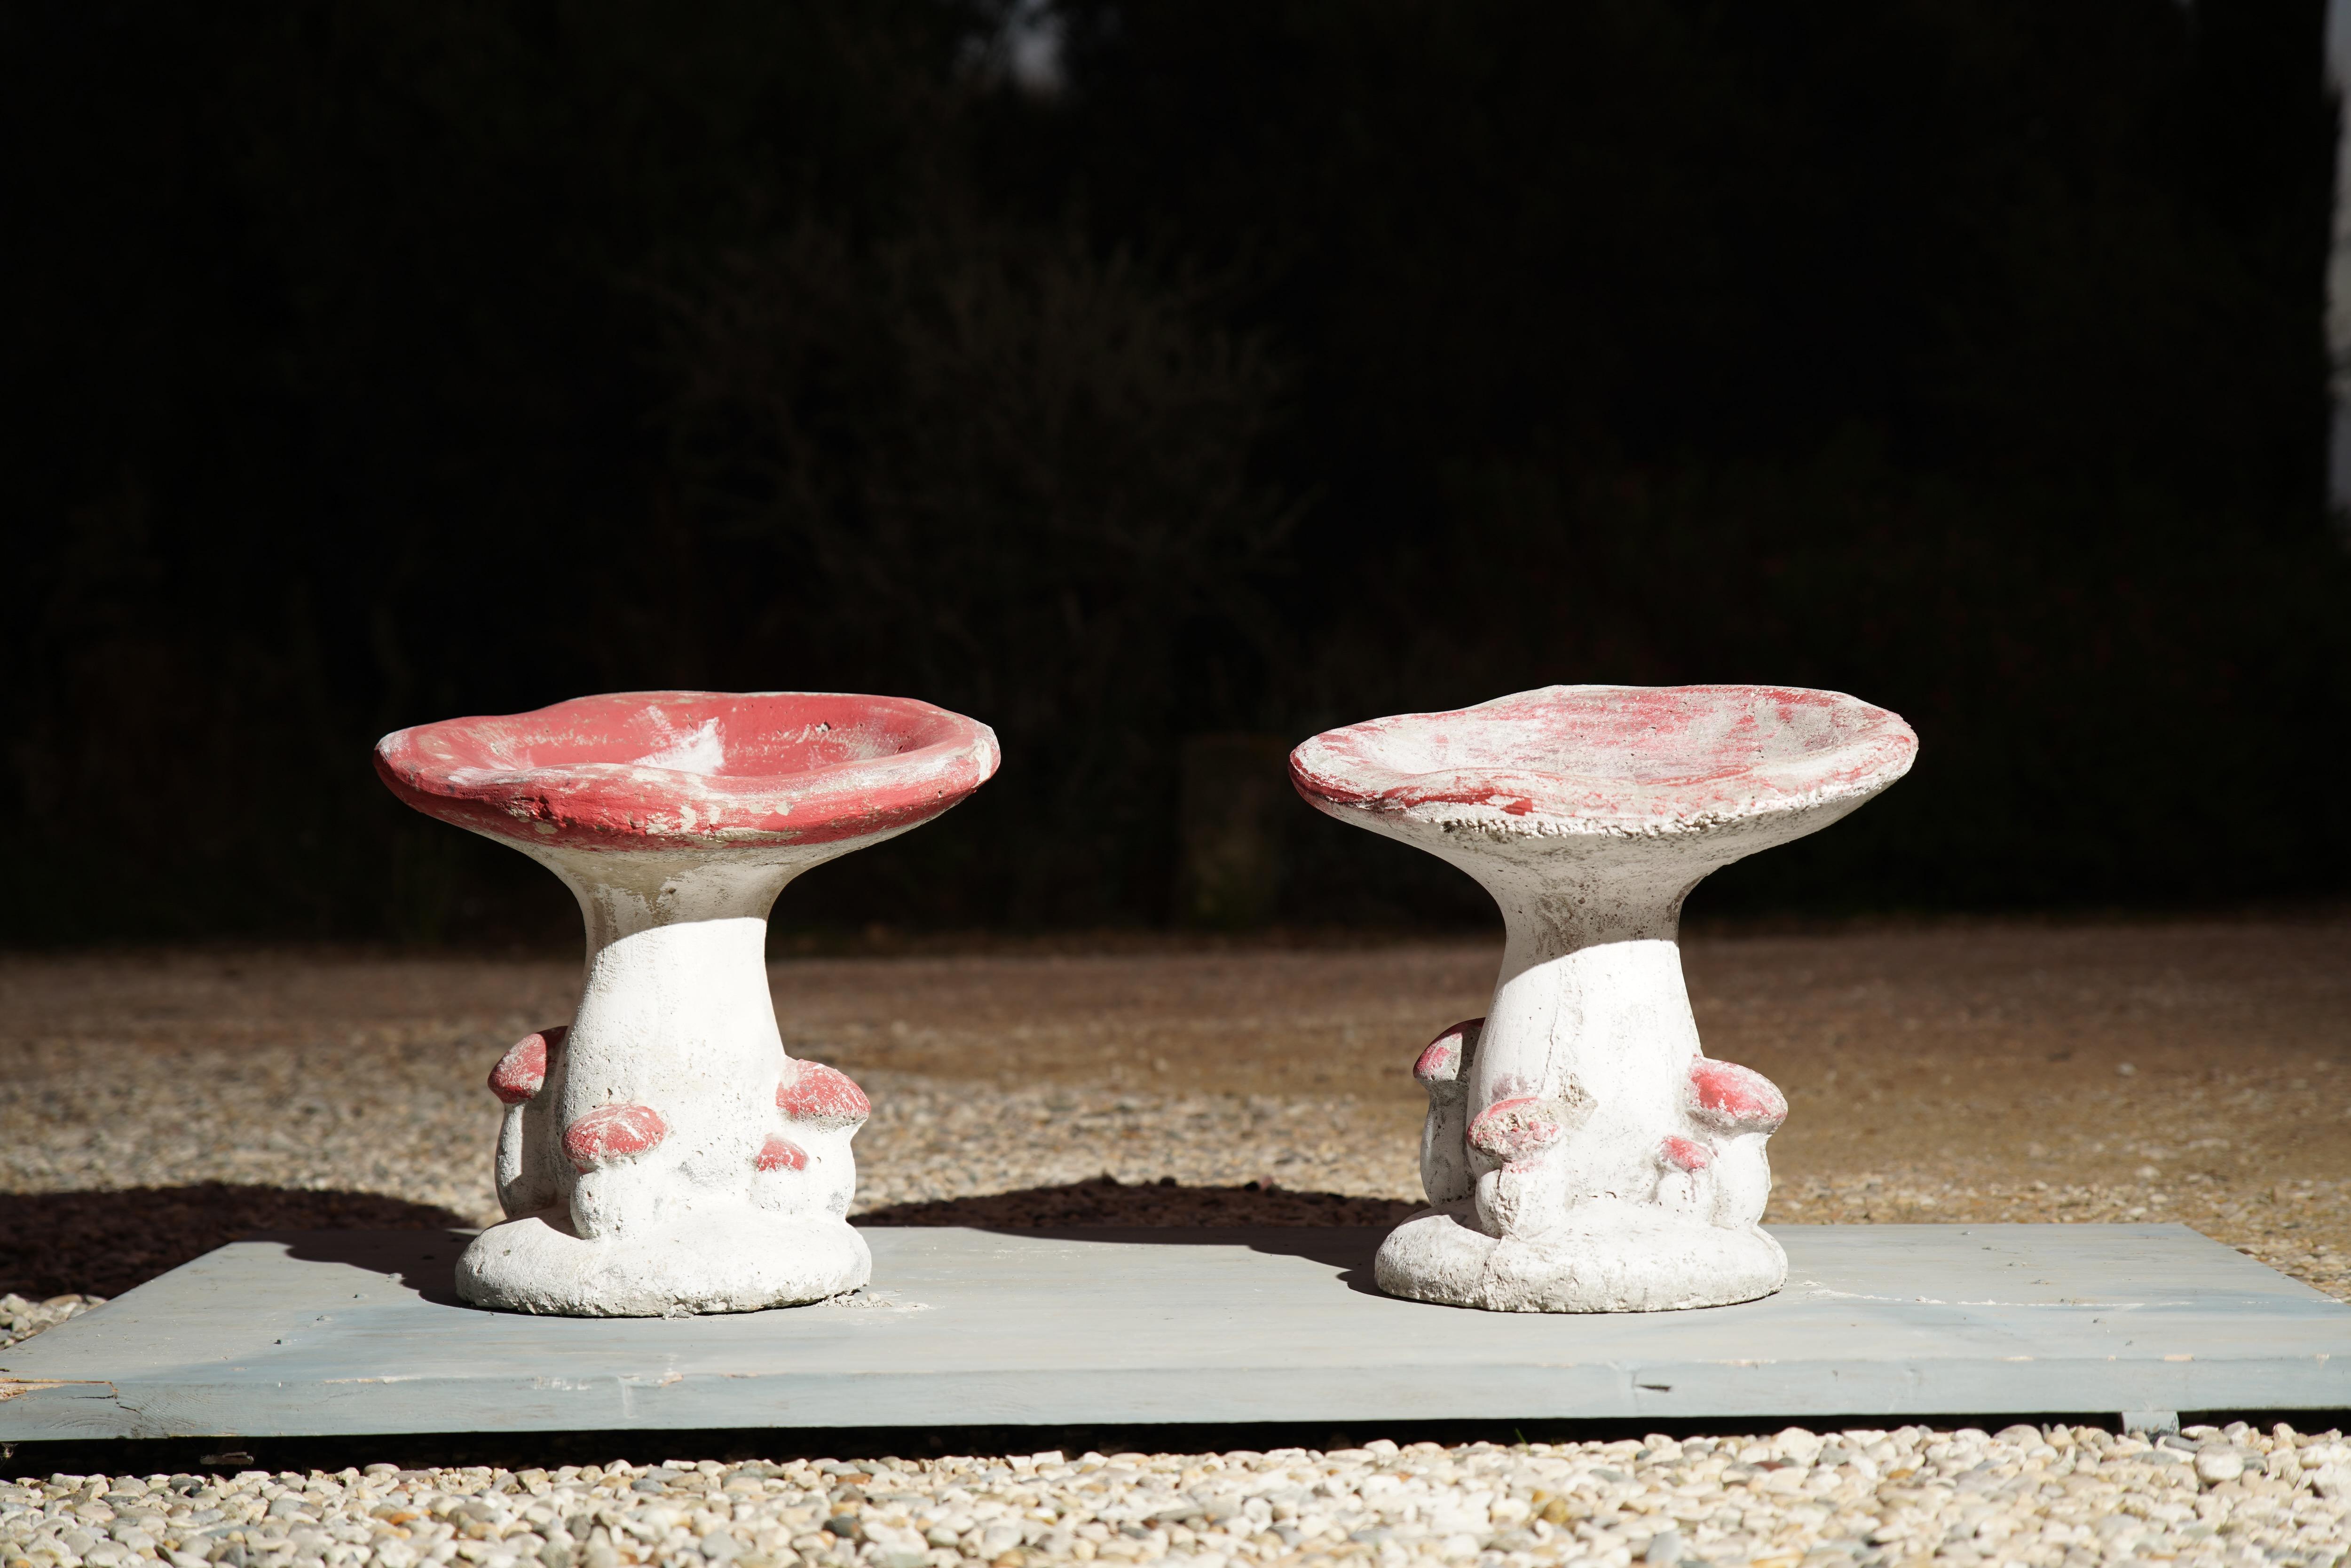 Molded Vintage French Concrete Mushroom Stools, 1950s For Sale